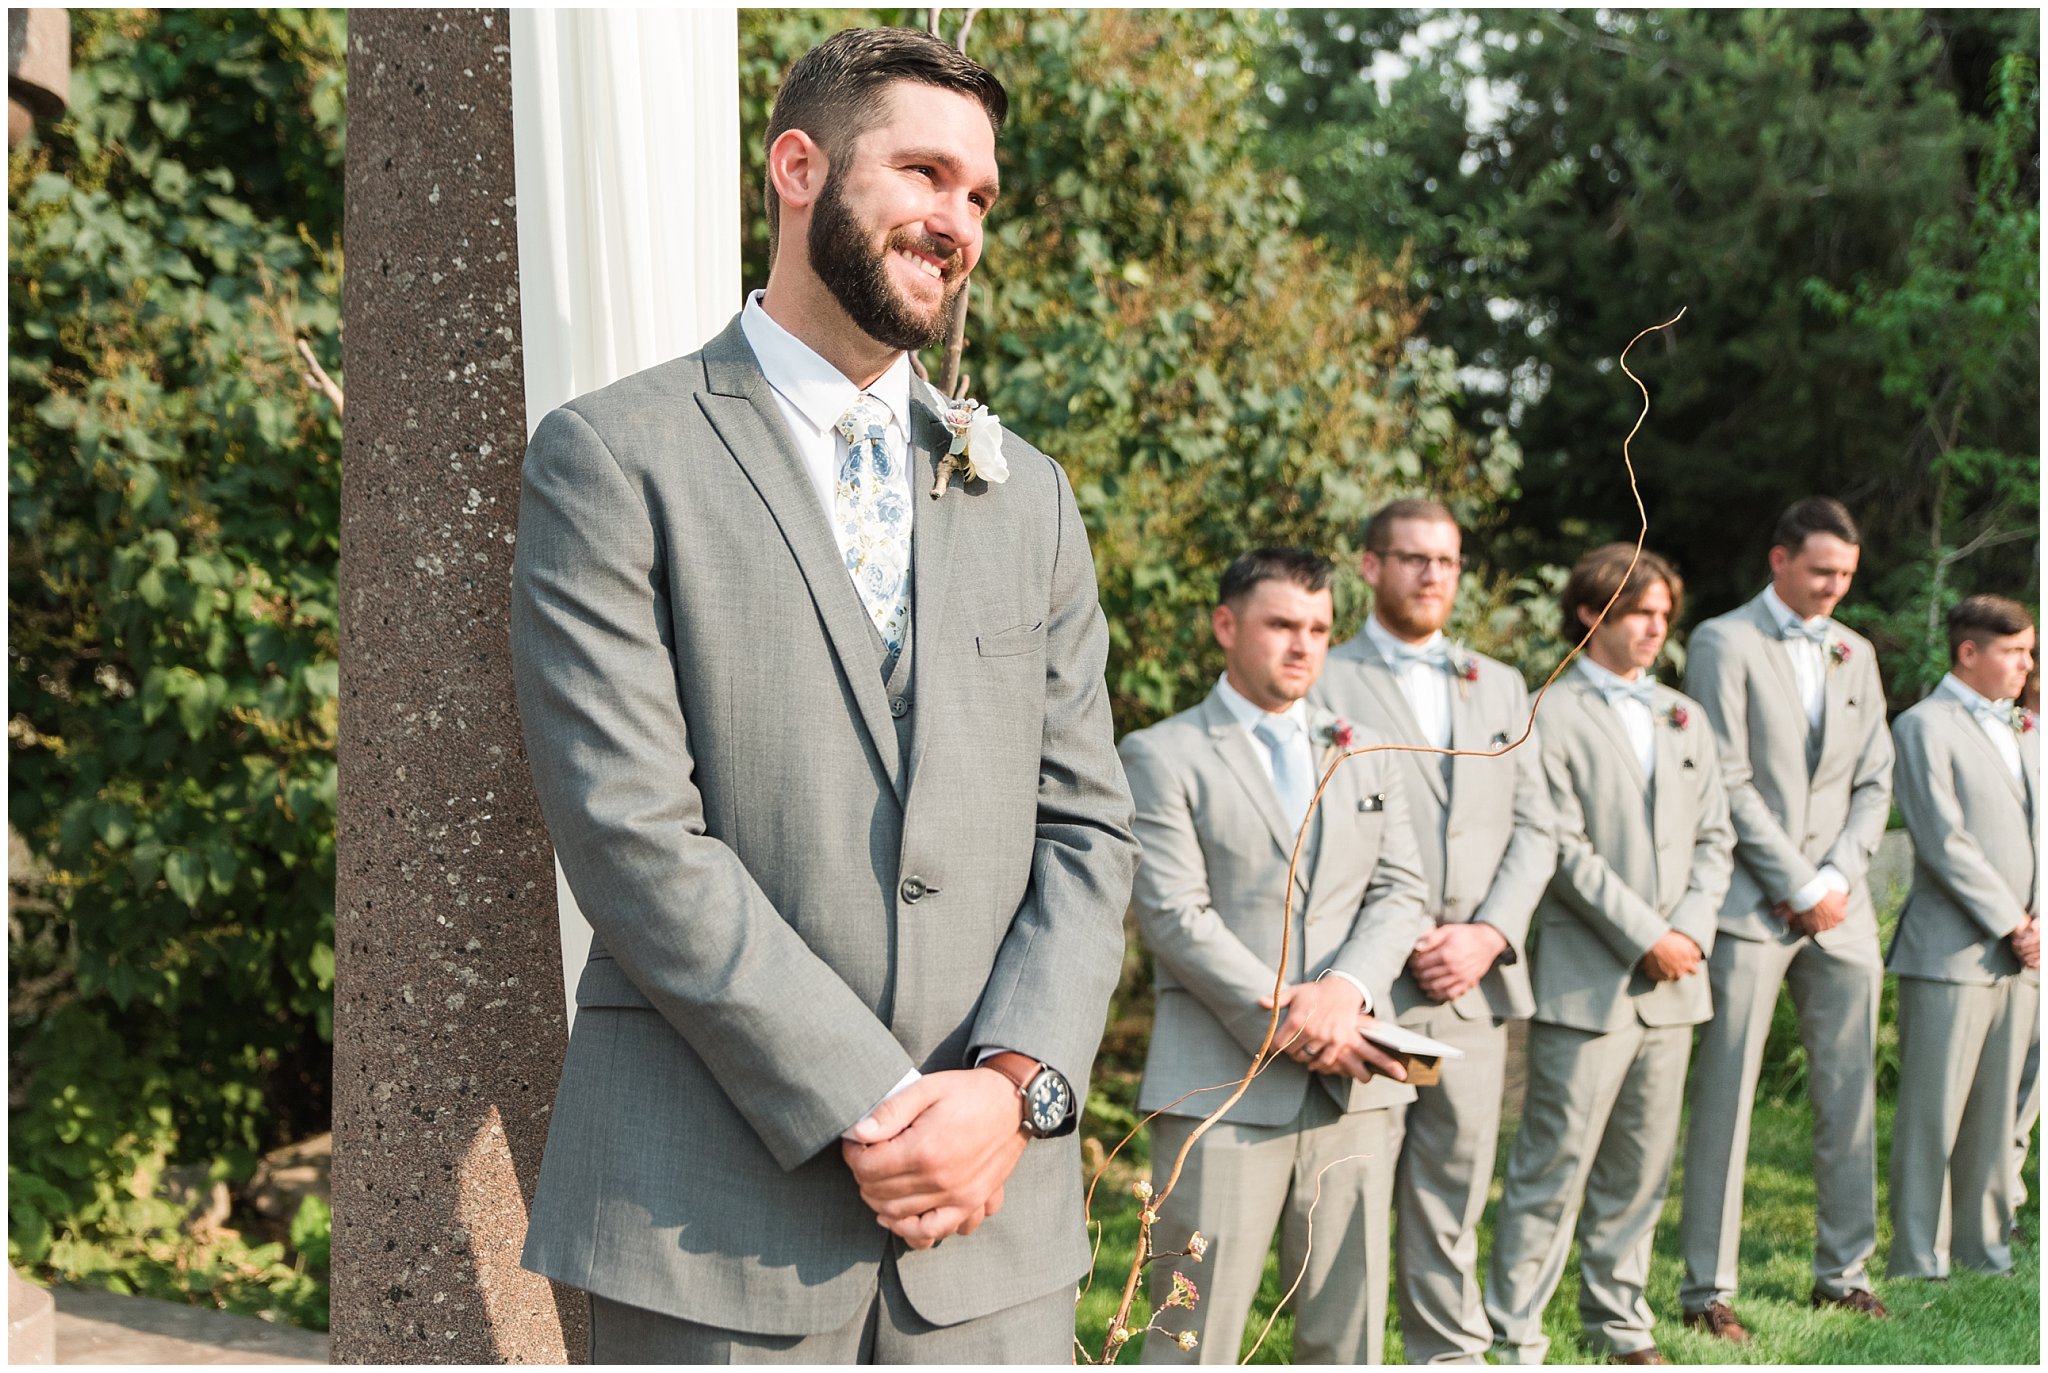 Groom's reaction to bride walking down the aisle | Dusty Blue and Rose Summer Wedding at Oak Hills Utah | Jessie and Dallin Photography